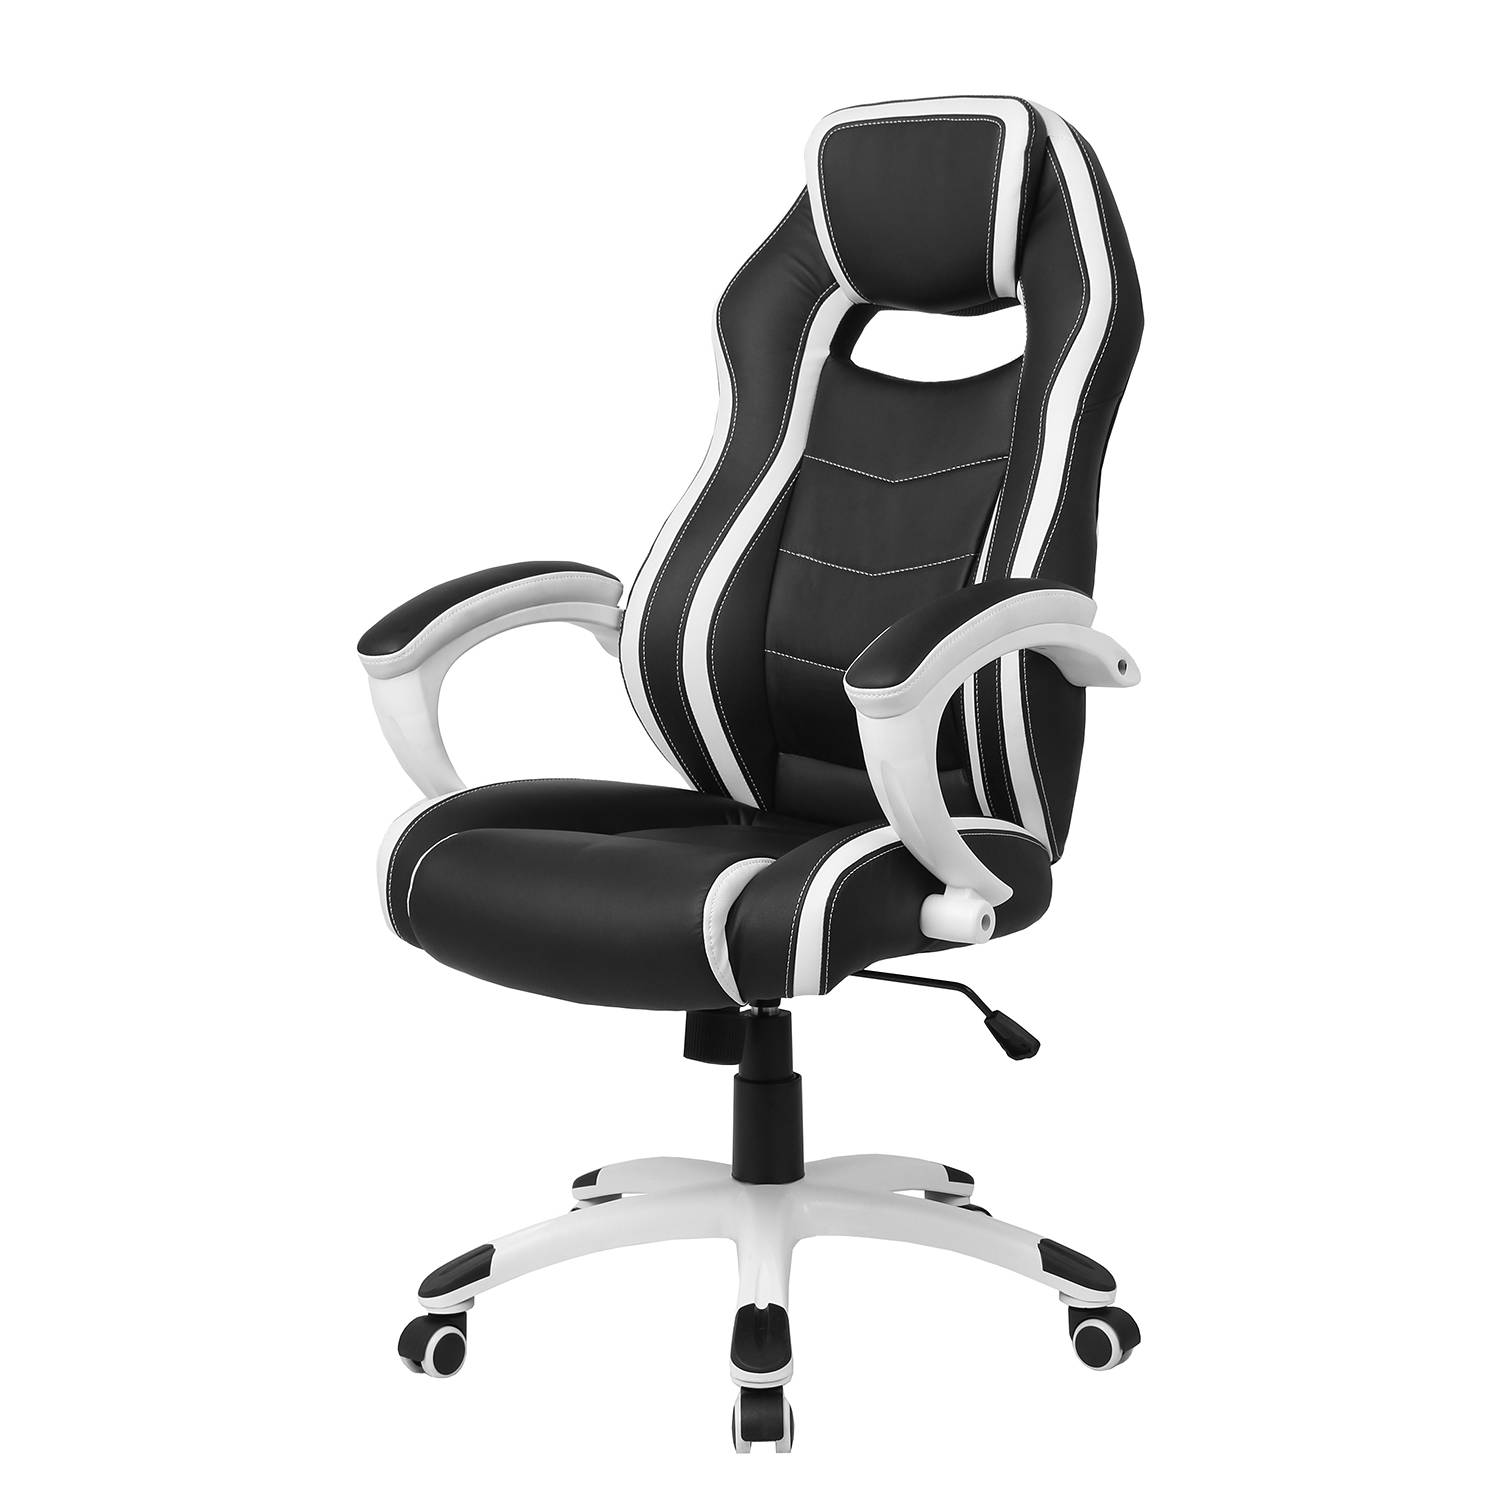 Image of Gaming Chair Meon 000000001000196340